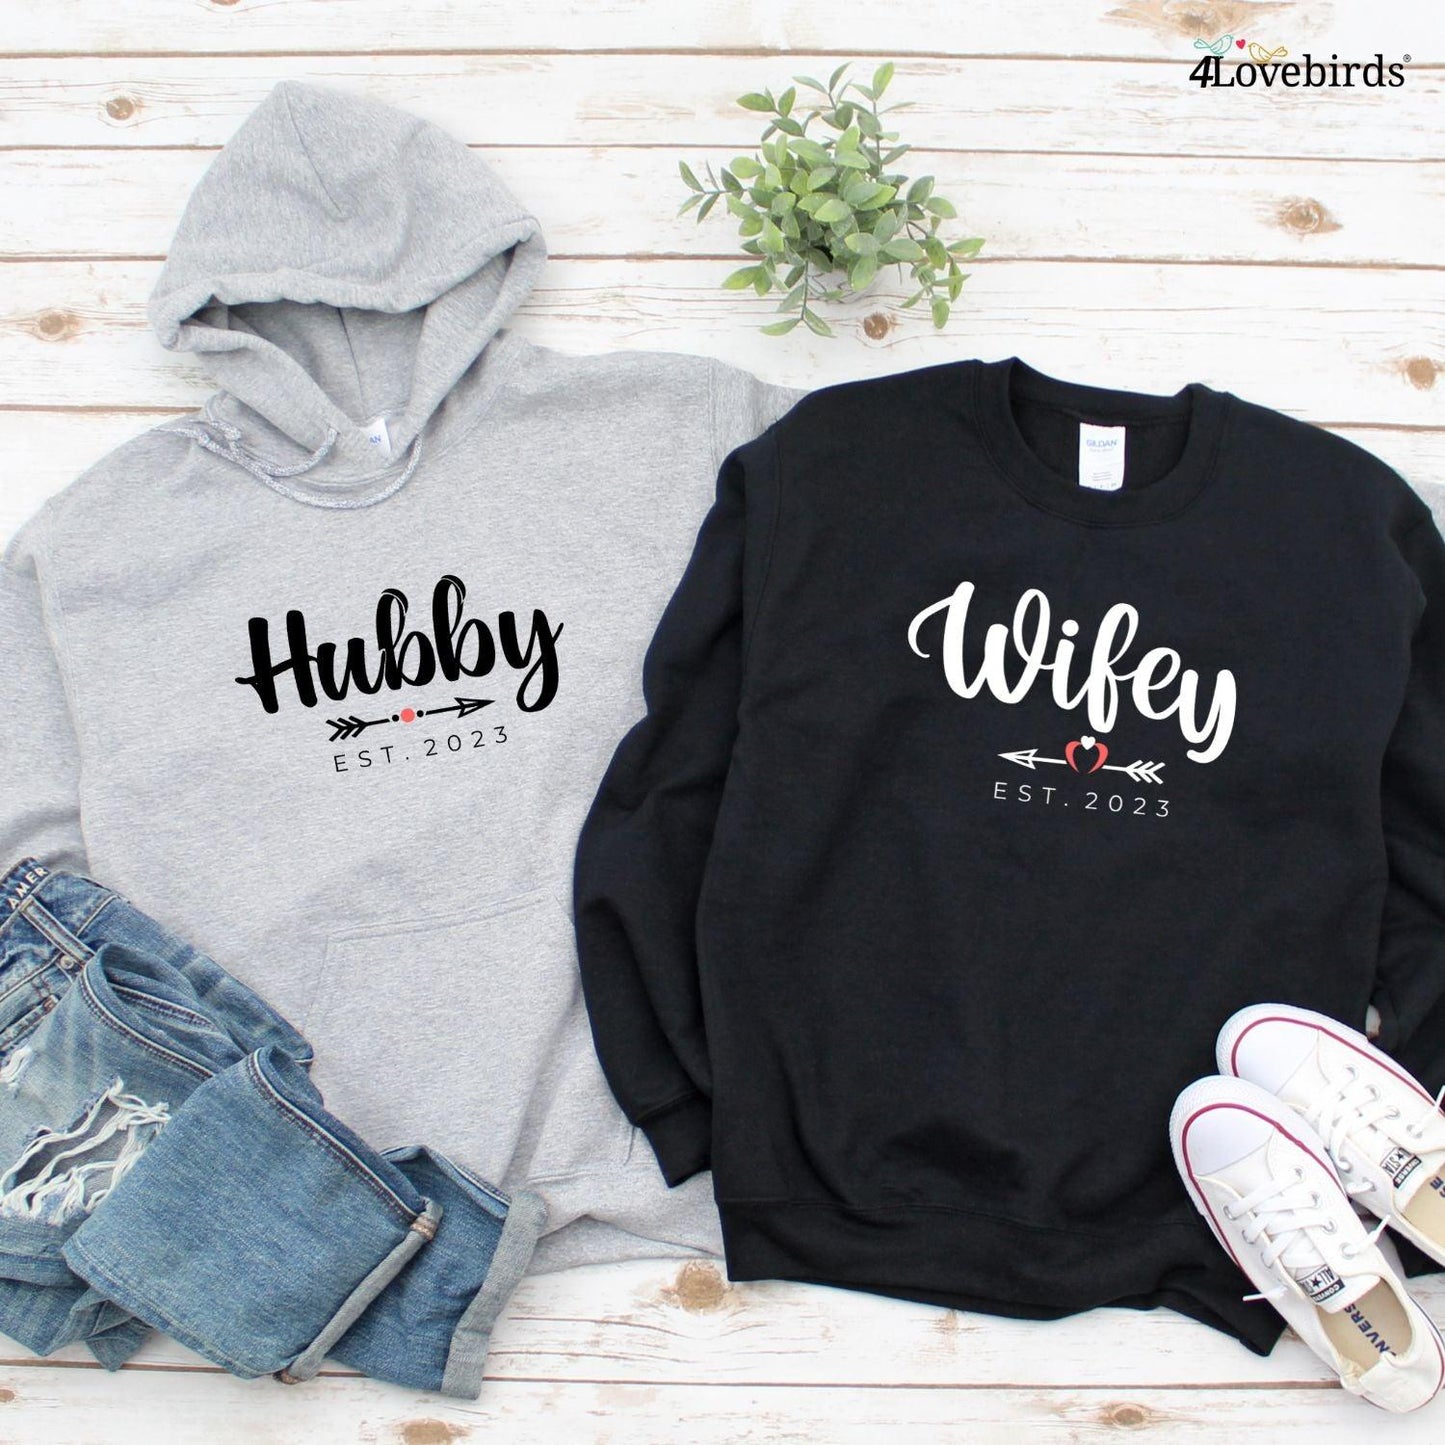 Hubby Wifey Customized Est Date Cozy Matching Outfits - Perfect for Couples - 4Lovebirds